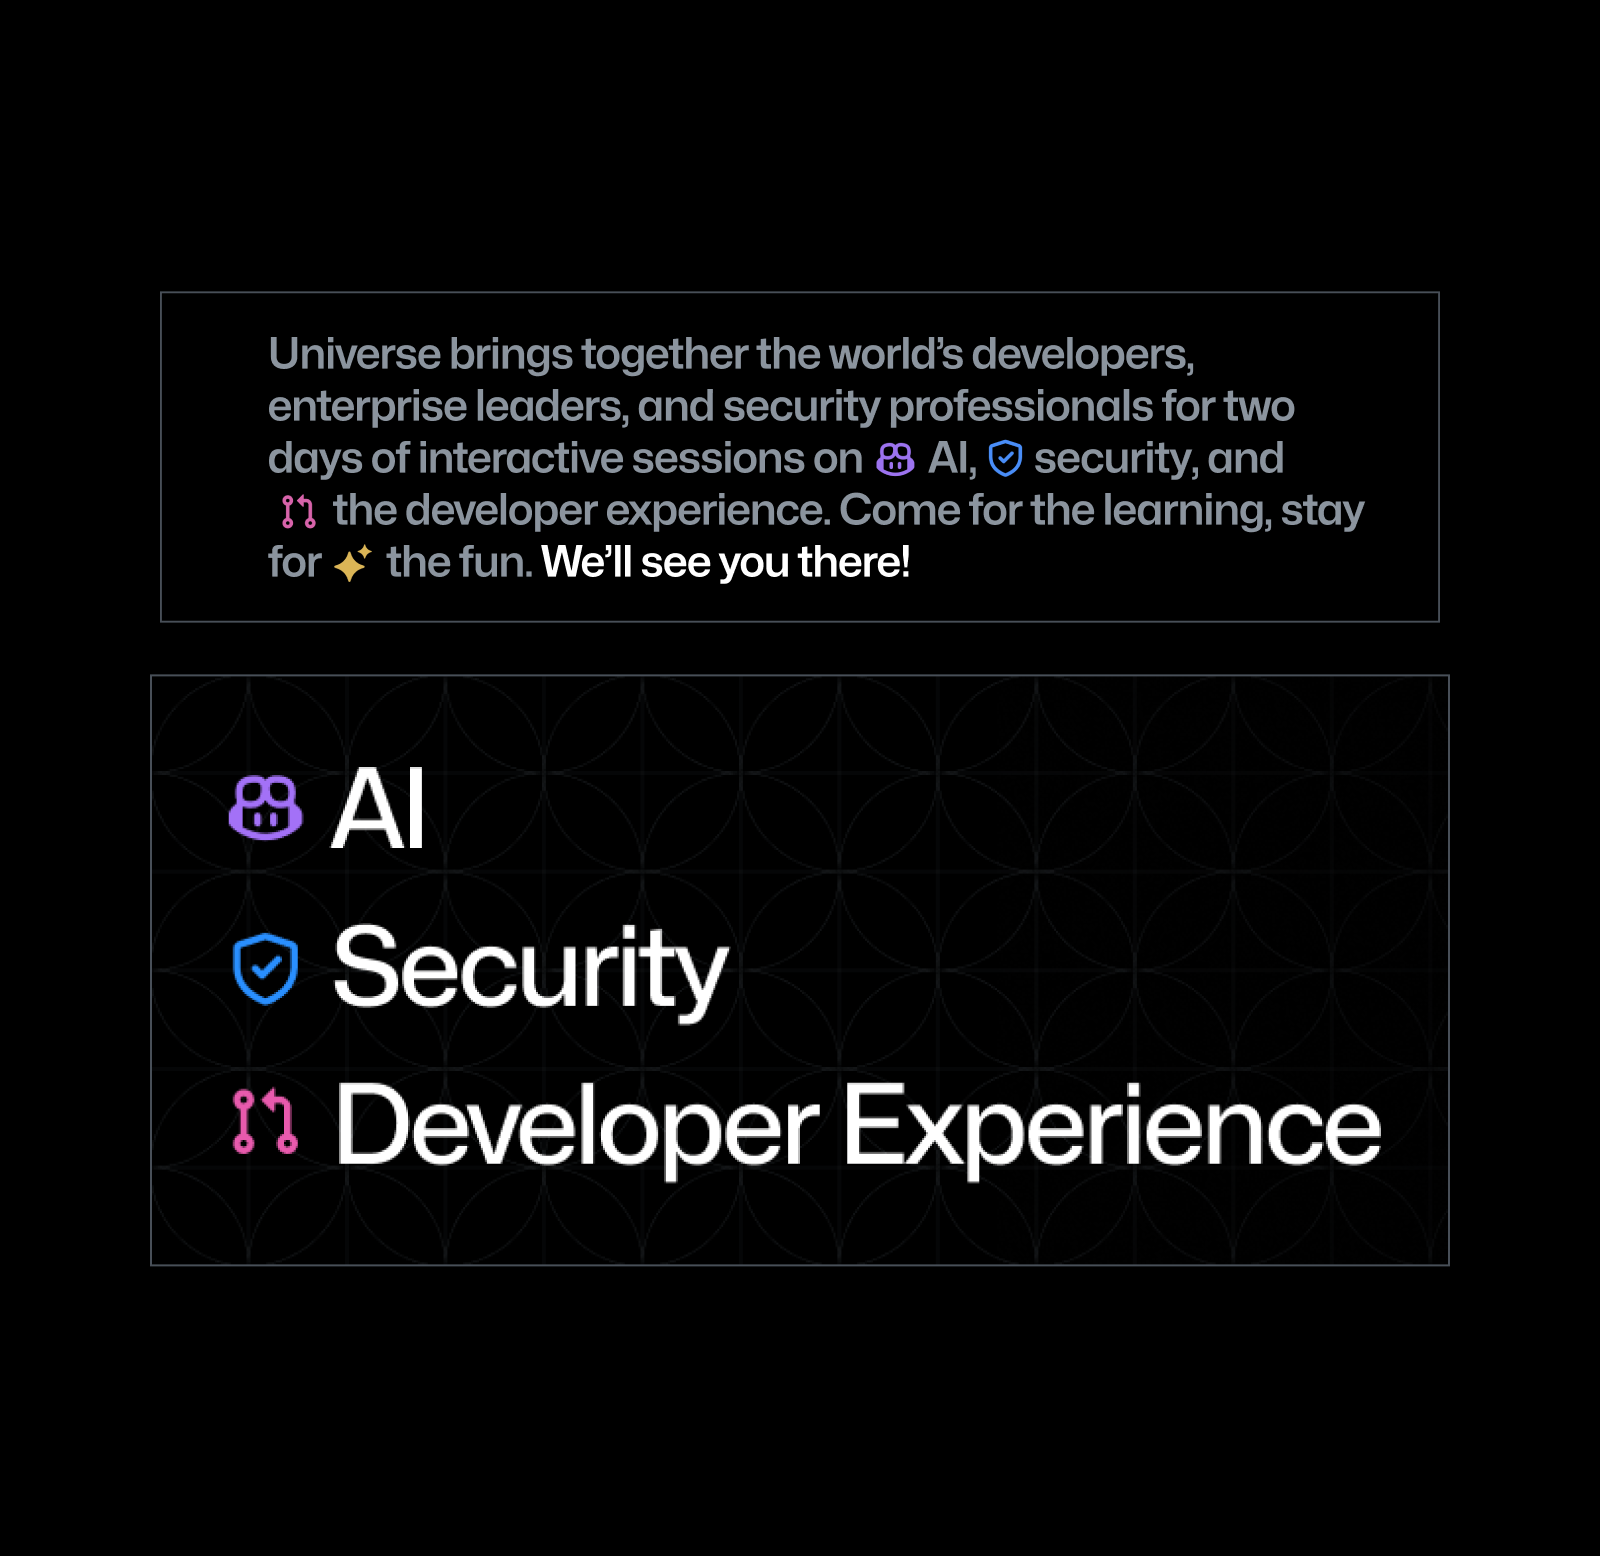 A black square asset featuring a paragraph of small text set in gray above three lines of larger text set in white. The paragraph of small text reads "Universe brings together the world’s developers, enterprise leaders, and security professionals for two days of interactive sessions on AI,security, and the developer experience. Come for the learning, stay for the fun. We’ll see you there!" There are colorful icons interspersed into the copy to create visual interest and punctuate the product areas mentioned. The large text underneath reads "AI, Security, Developer Experience" and each line is paired with a colorful icon.